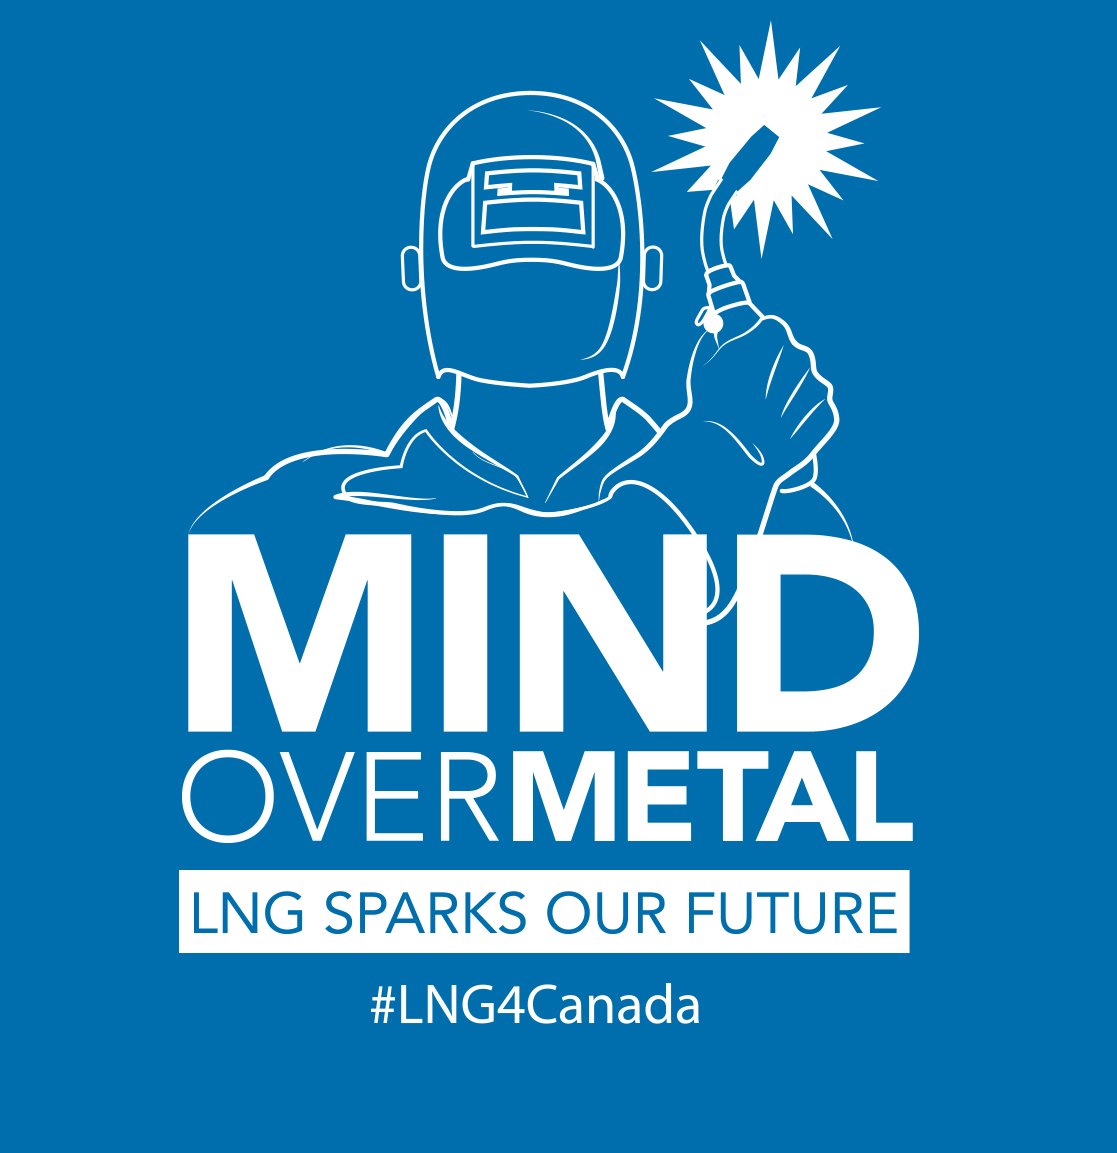 Introducing our 2018 MOM Camp Sponsor, LNG Canada! #NewWelderNation is gearing up for the weeks ahead of LNG Camps  #MOMCamp18 LNG Sparks Our Future #LNG4Canada